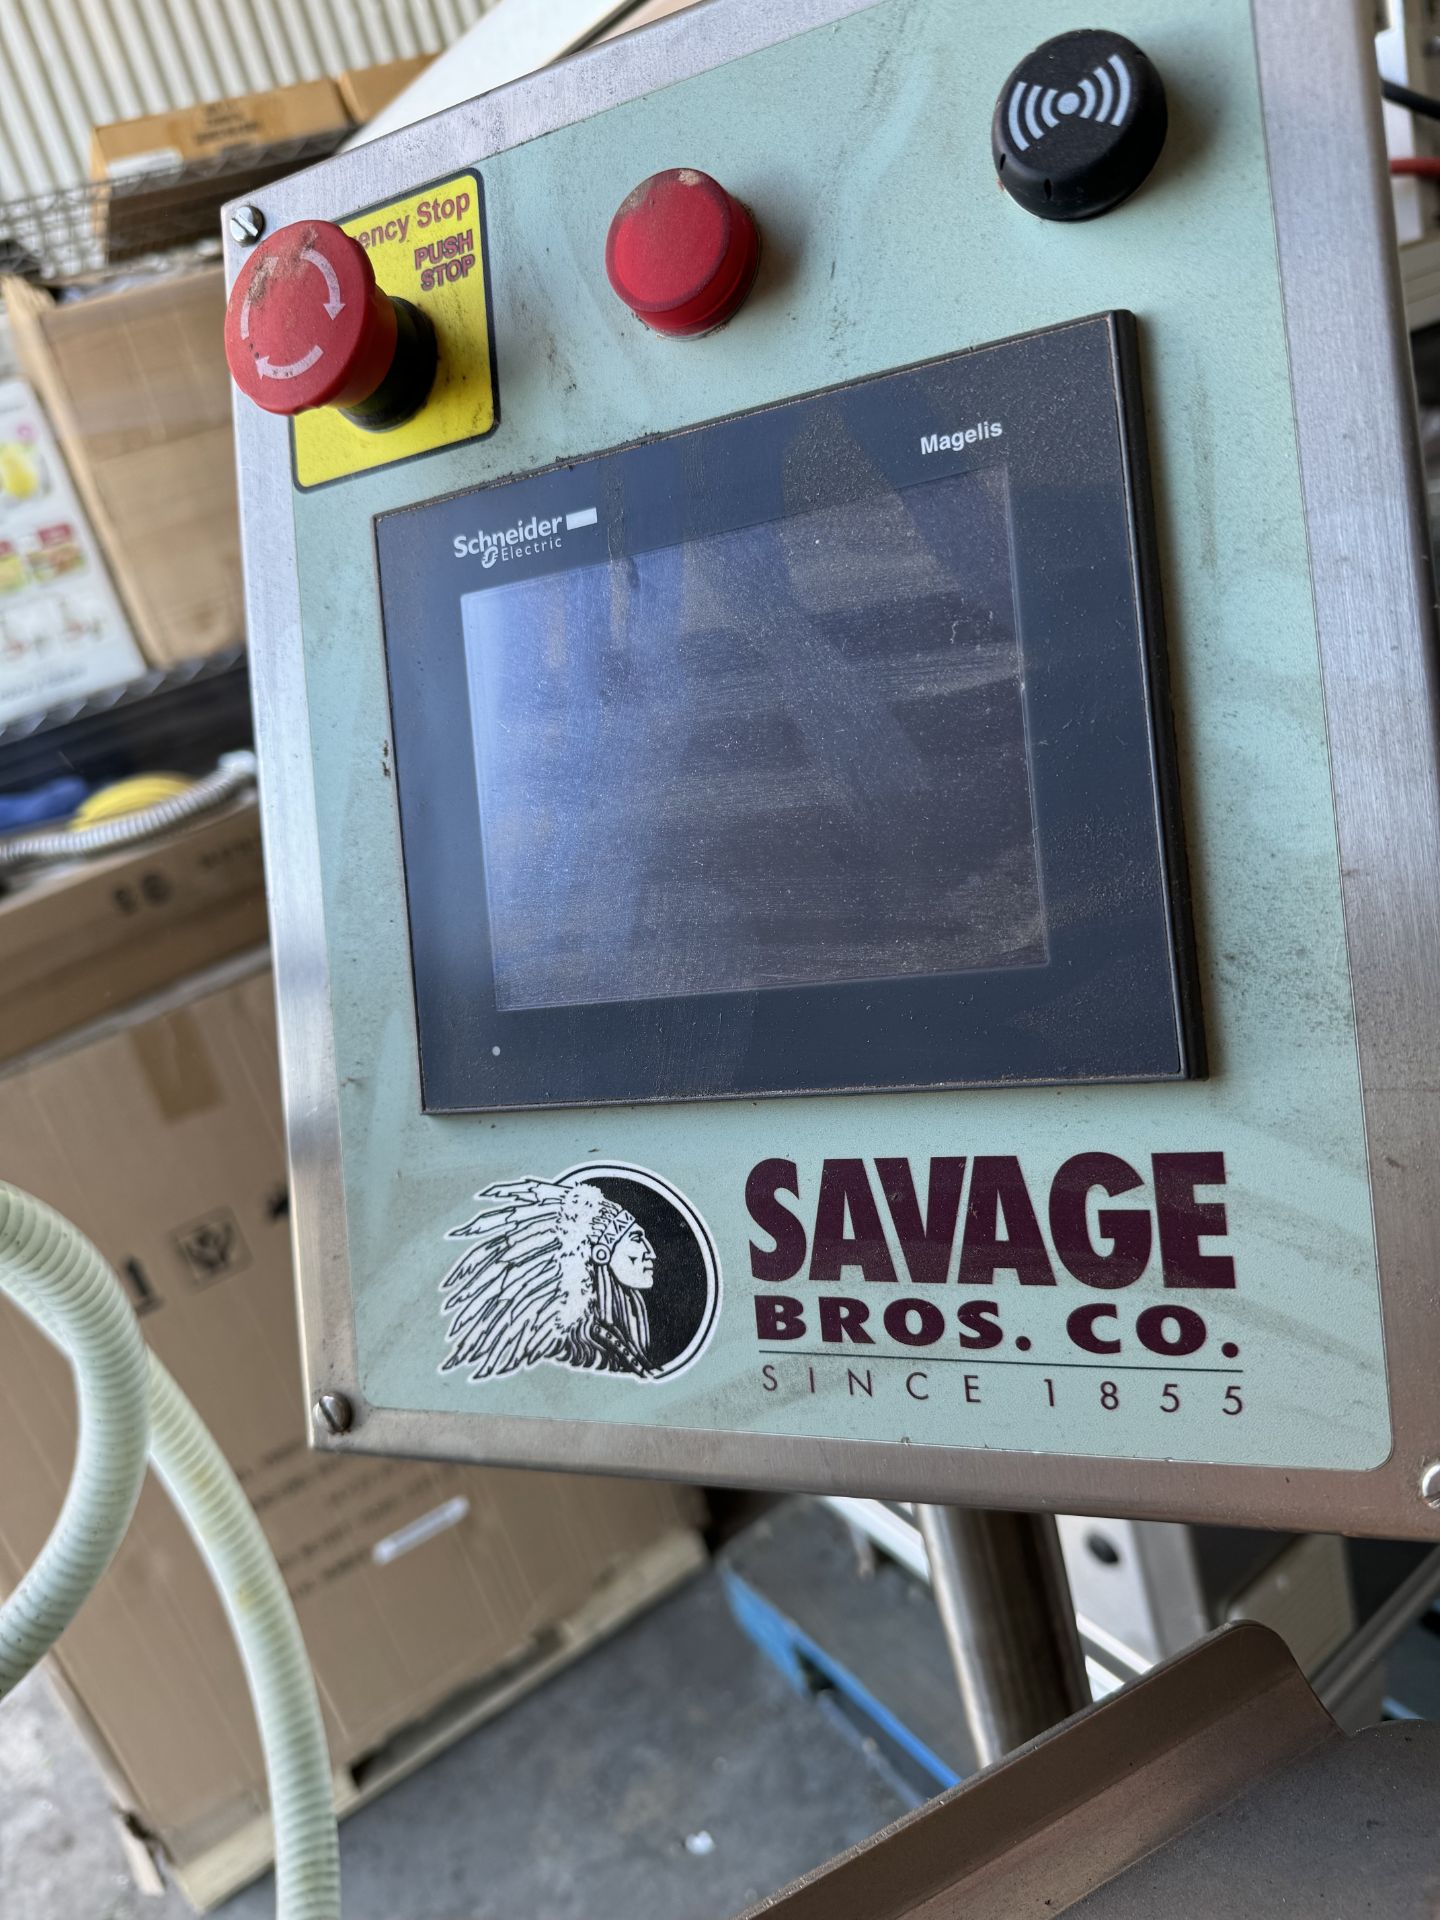 Used Savage Bros Chocolate Molding Temperer, Depositor & Vibrating Table. Model 1417-60-900 - Image 7 of 7